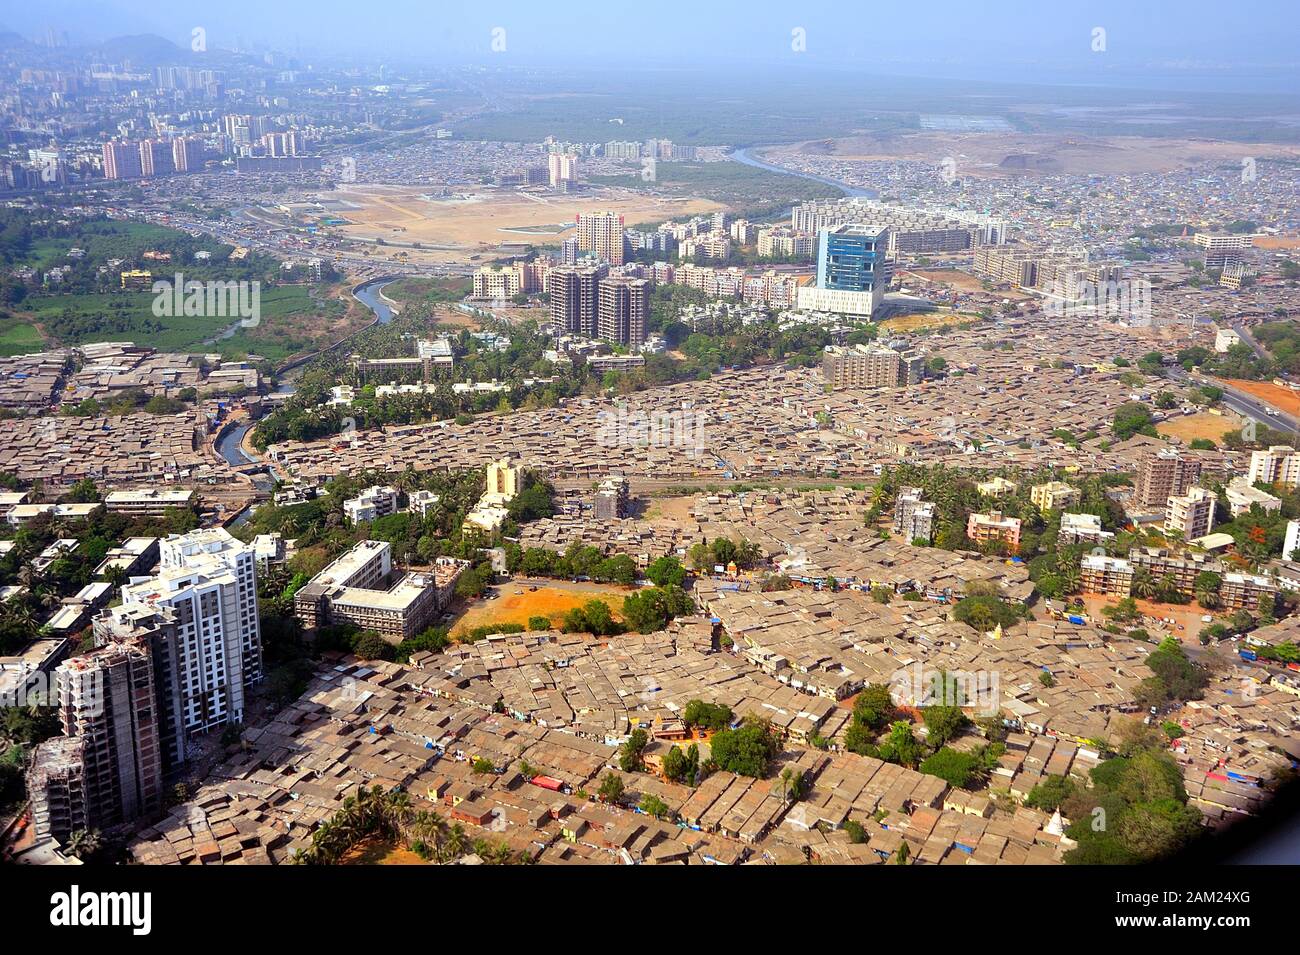 Mumbai Slums Aerial High Resolution Stock Photography and Images - Alamy